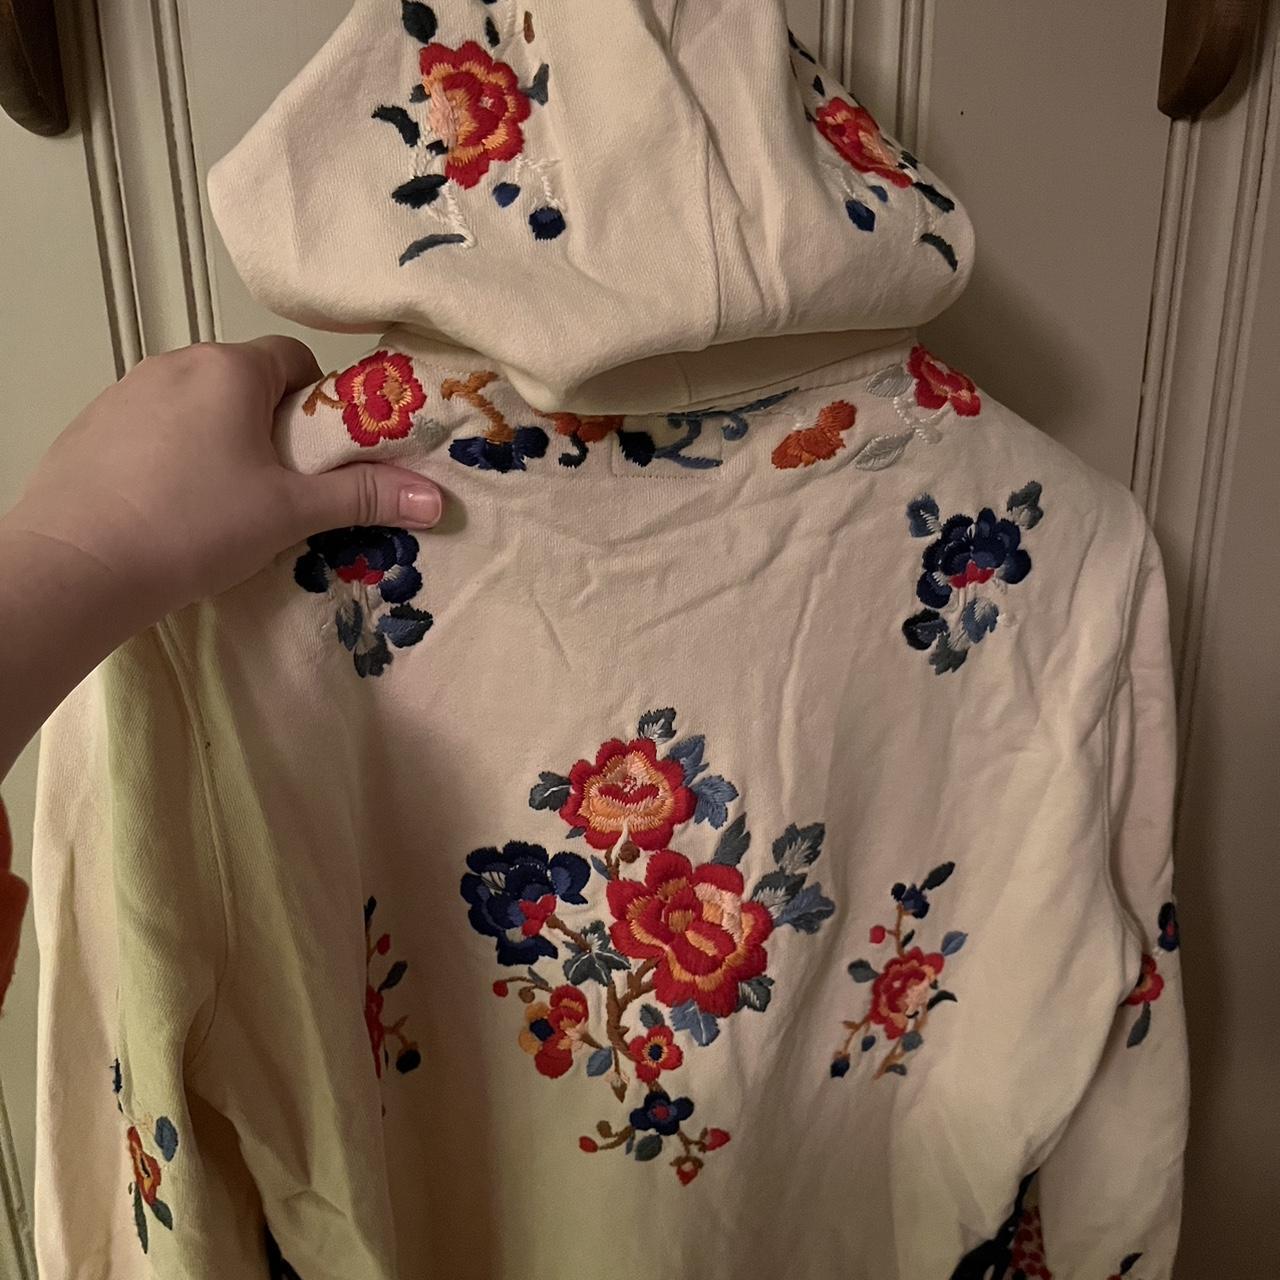 Early 2000s Lucky Brand hoodie with beautiful, - Depop